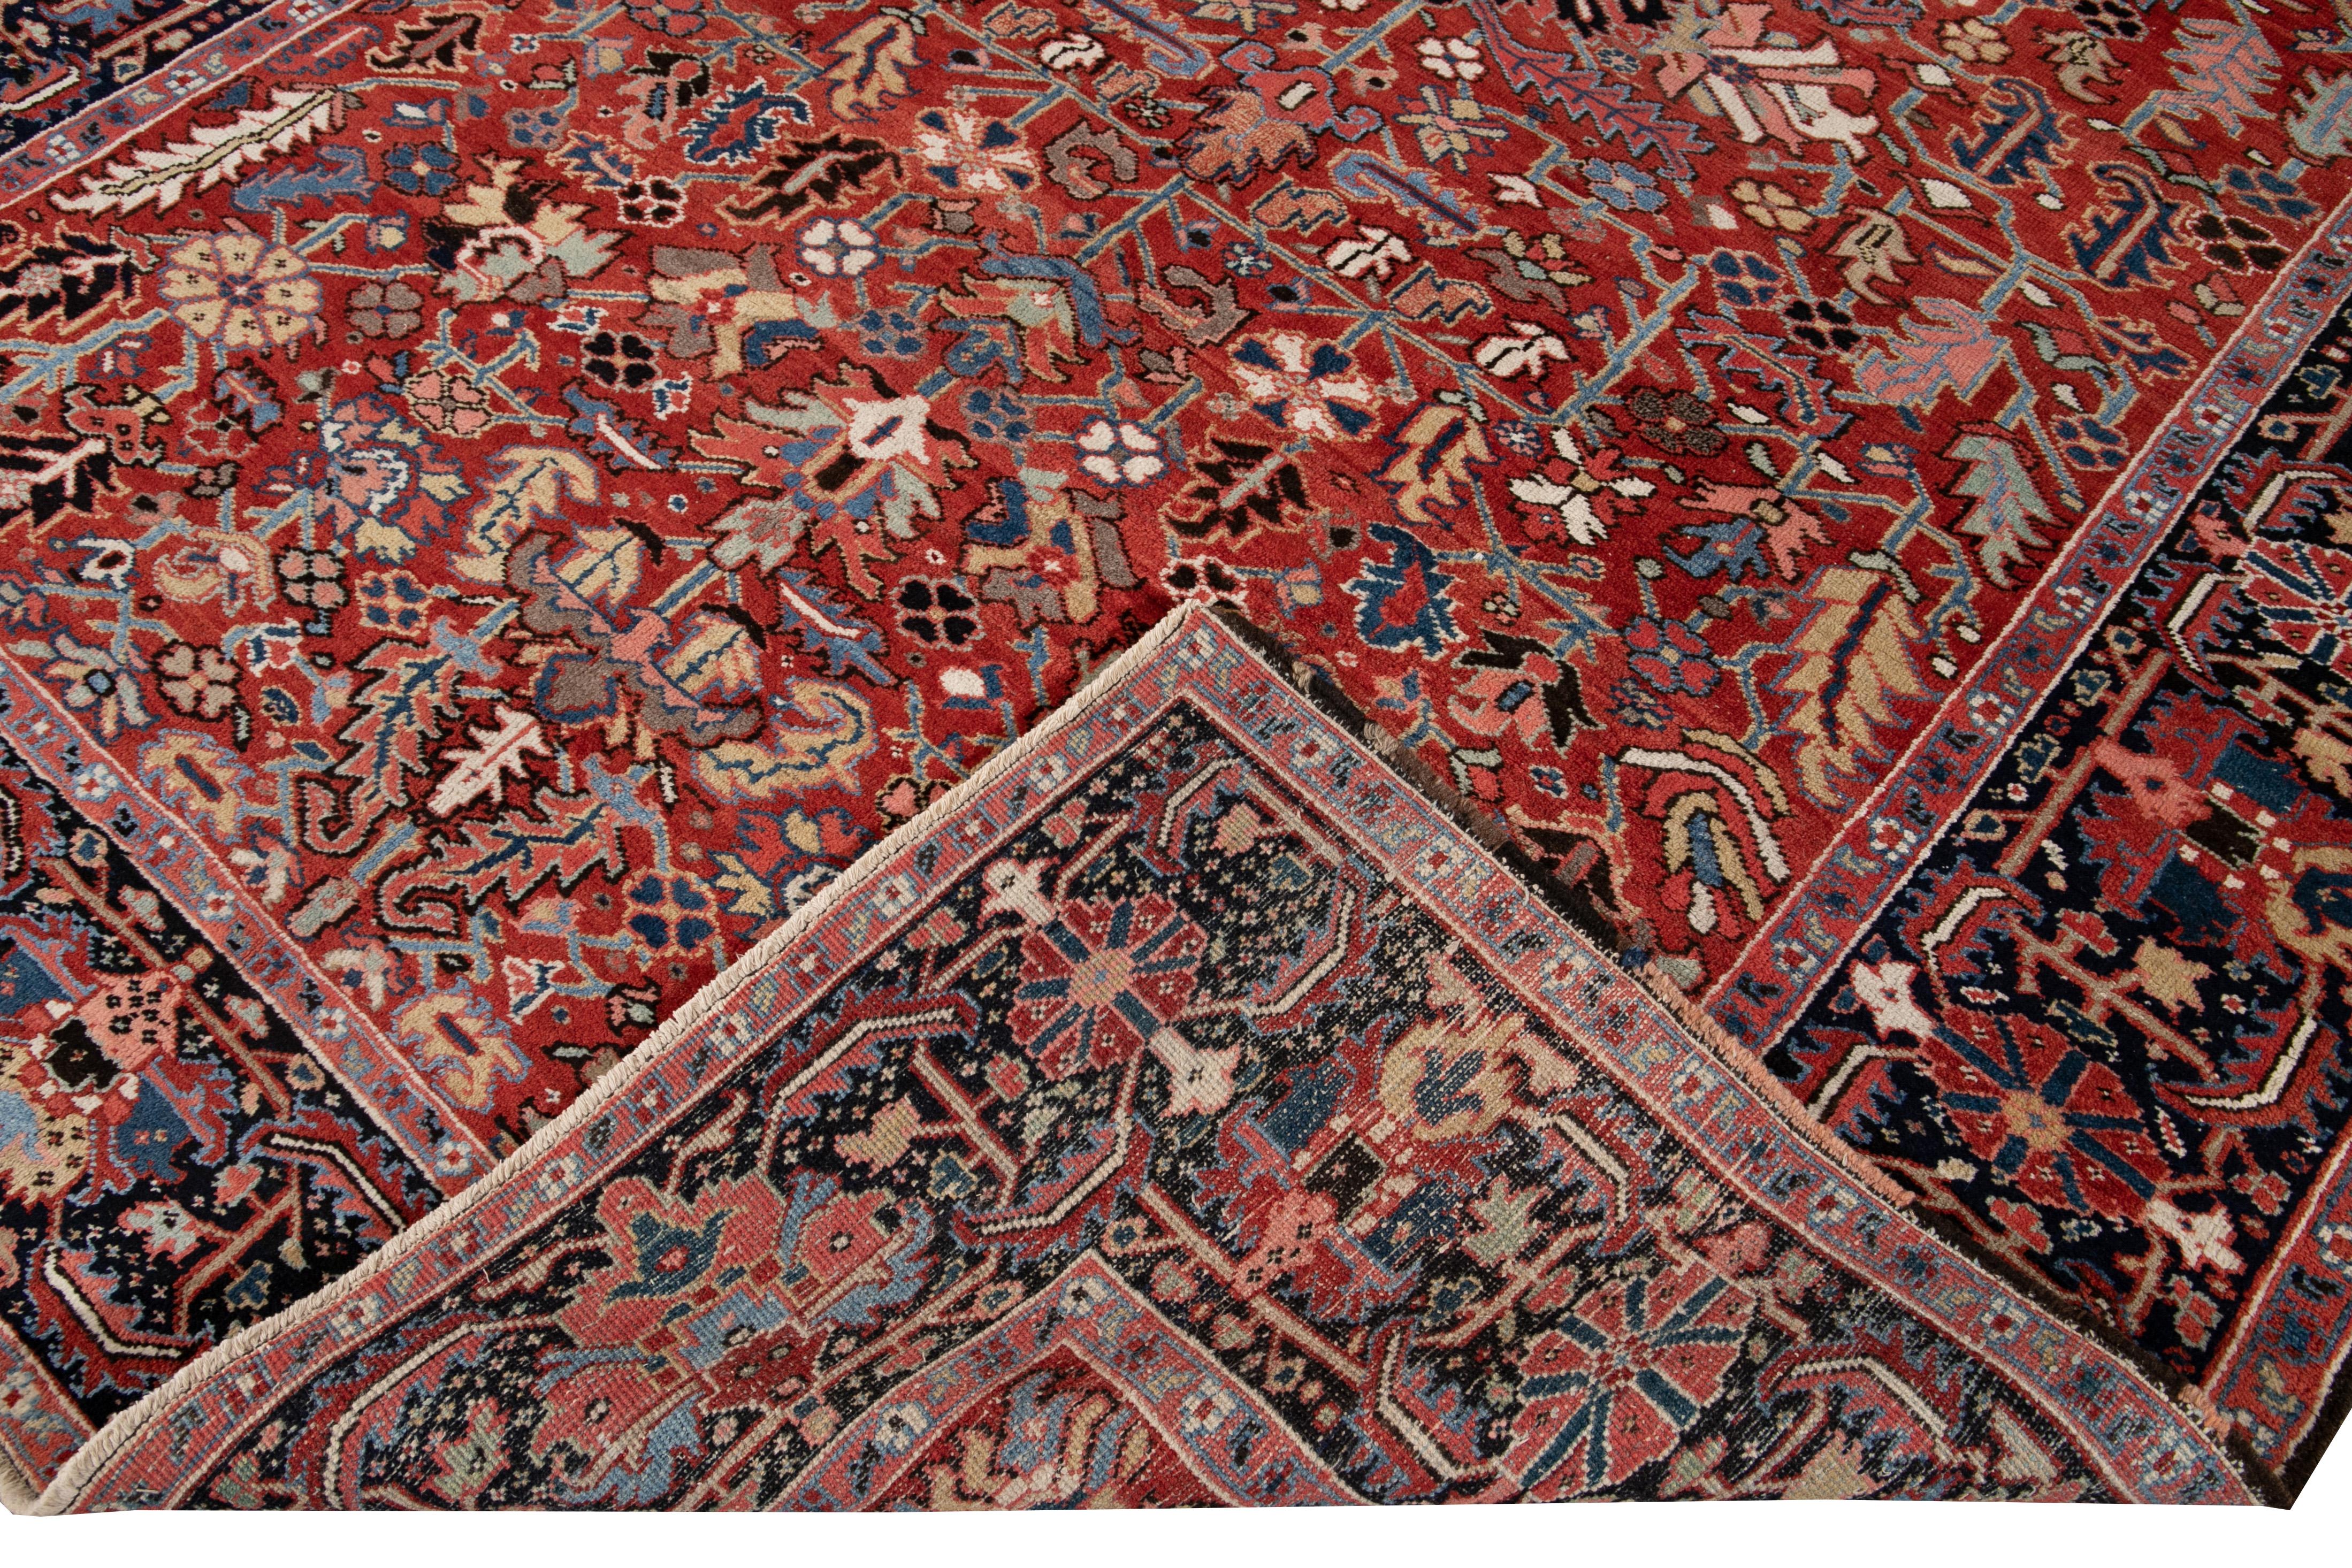 Beautiful antique Persian distressed Heriz hand knotted wool rug with a red field. This Heriz rug has multi-color accents in an all-over gorgeous geometric floral design.

This rug measures: 8'1